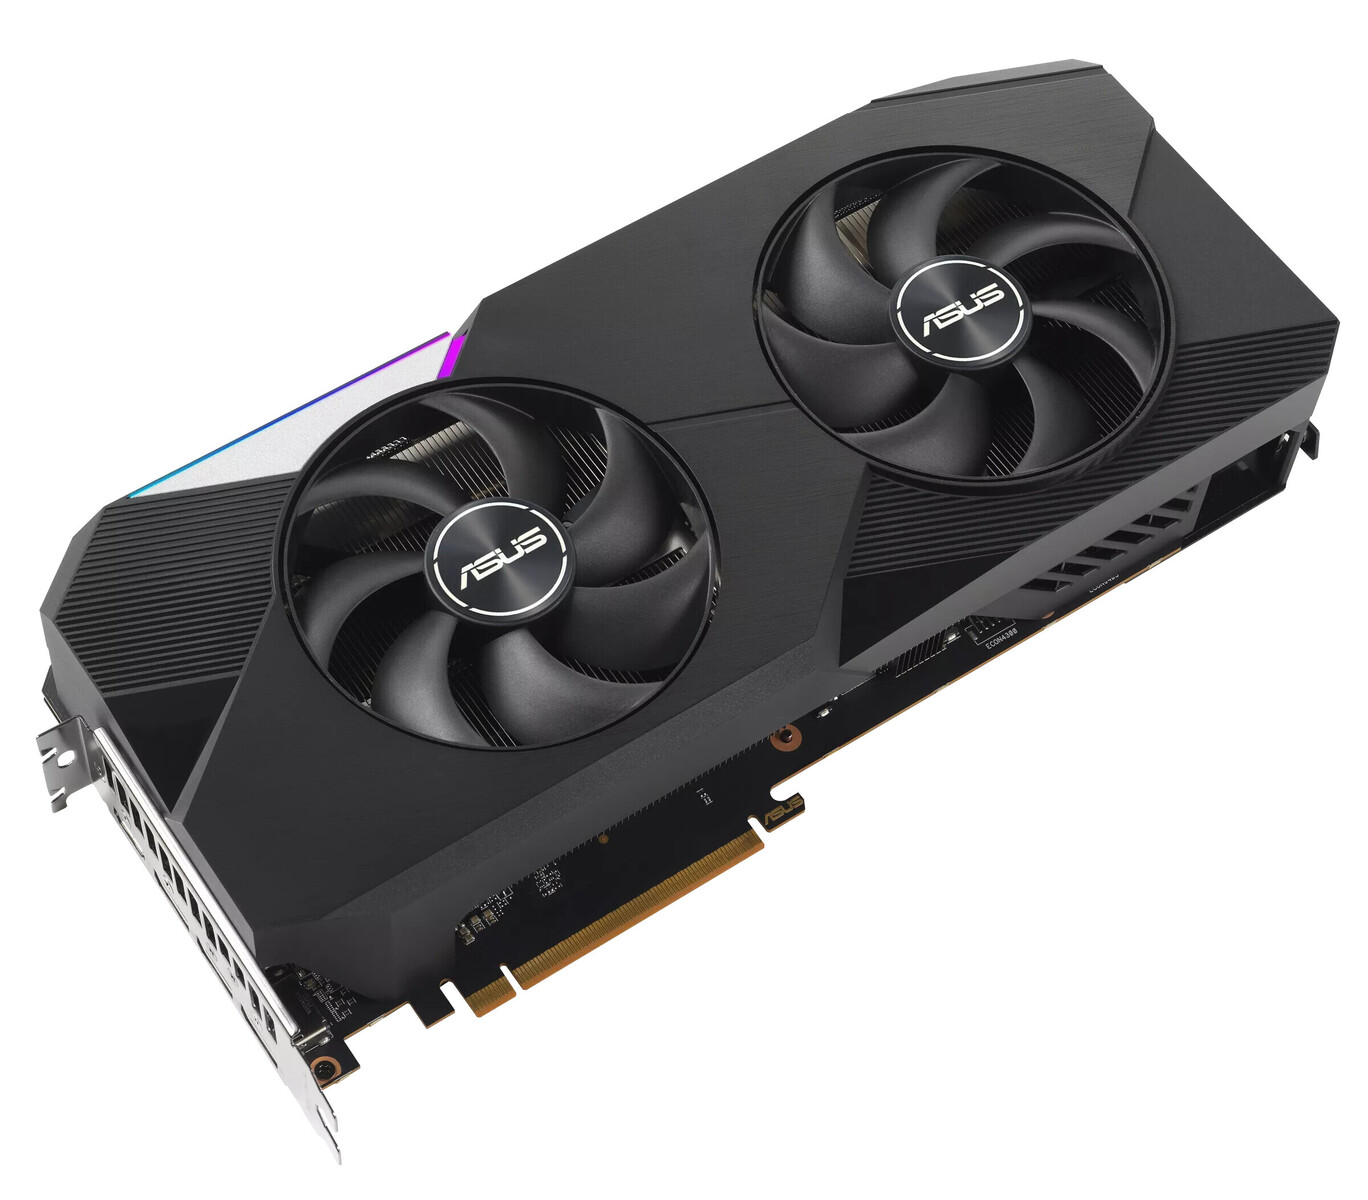 ASUS introduces the Radeon RX 7900 XTX and RX 7900 XT DUAL OC graphics cards.